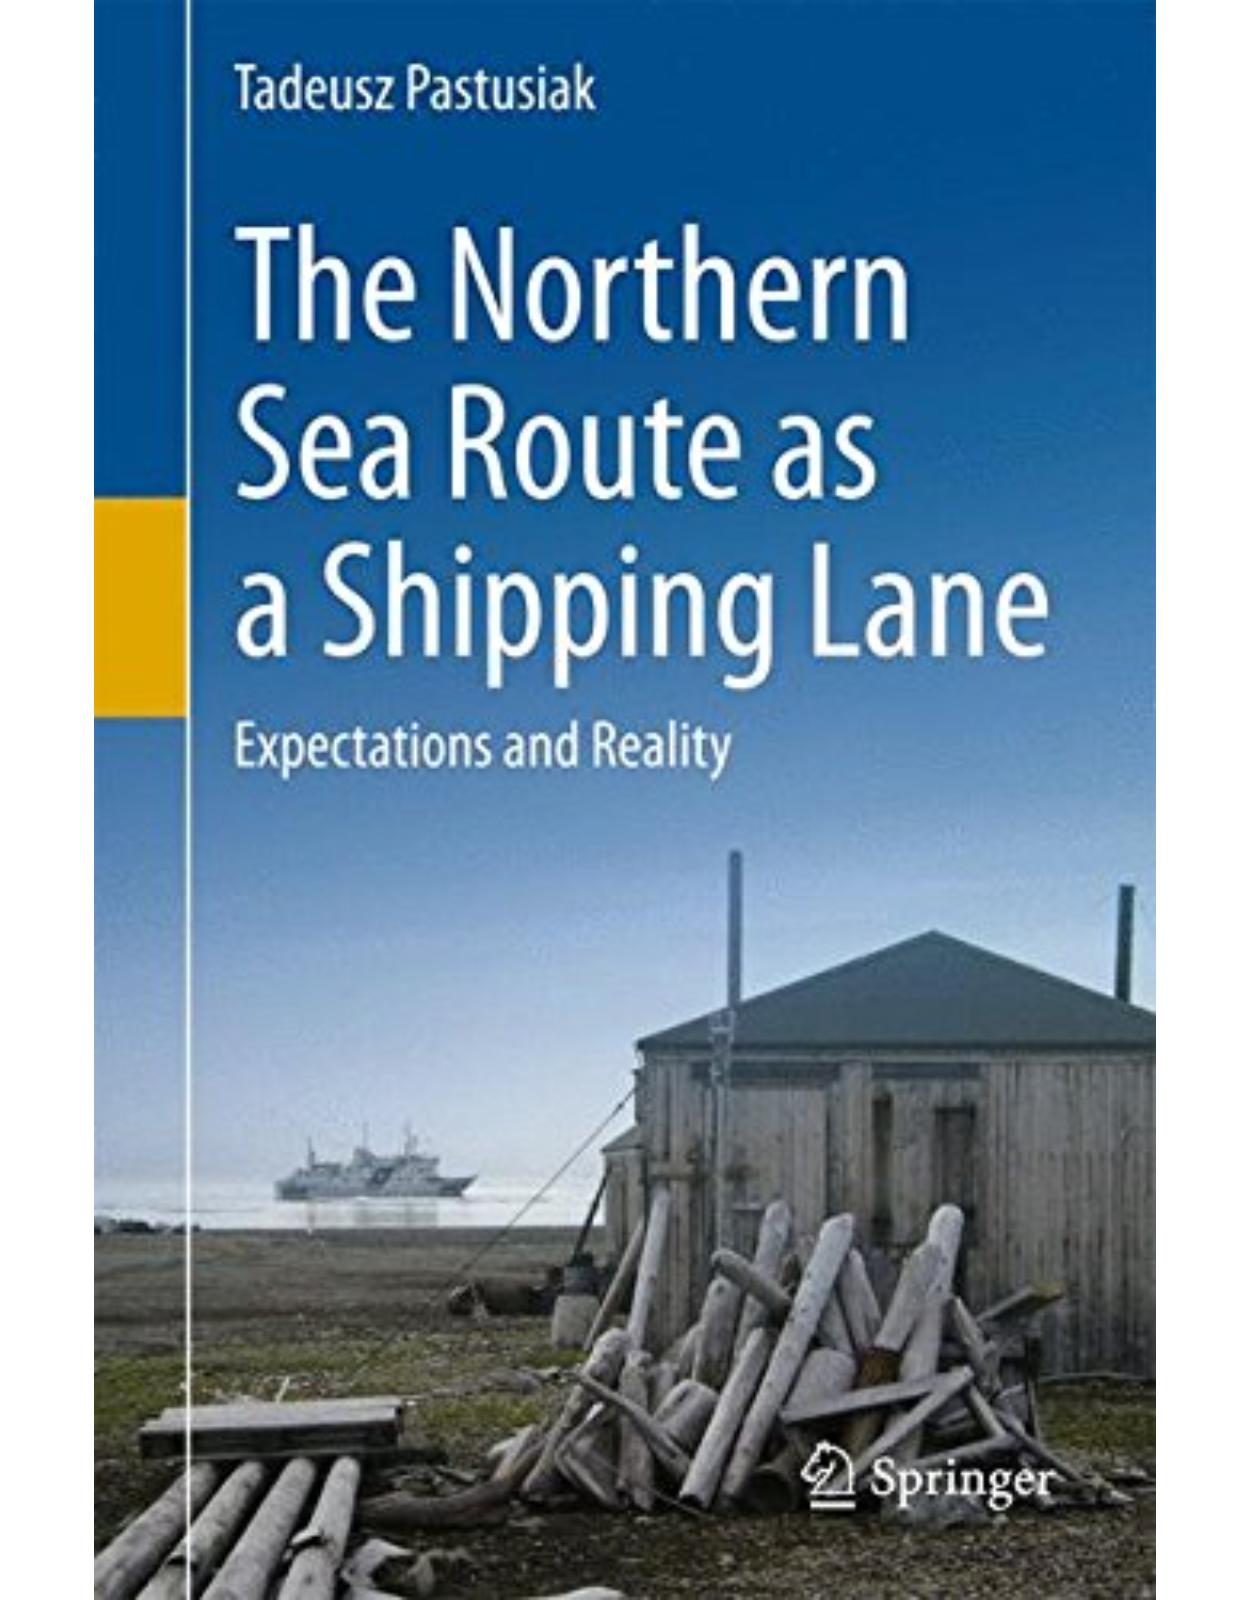 The Northern Sea Route as a Shipping Lane: Expectations and Reality